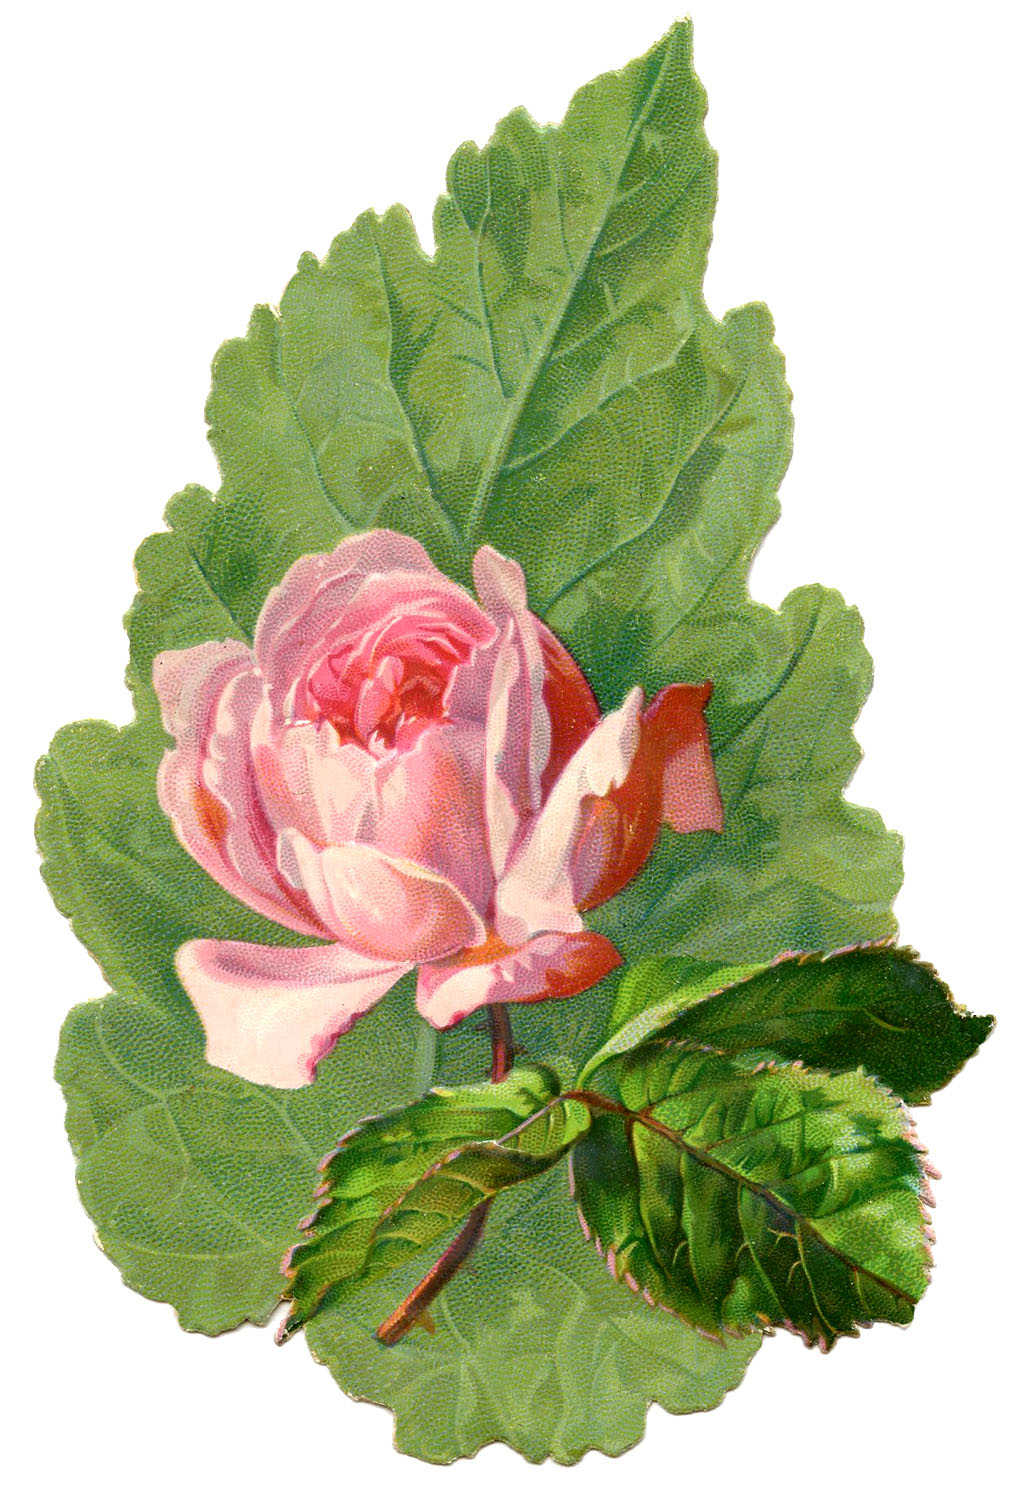 Vintage Image   Extra Pretty Pink Rose With Leaf   The Graphics Fairy